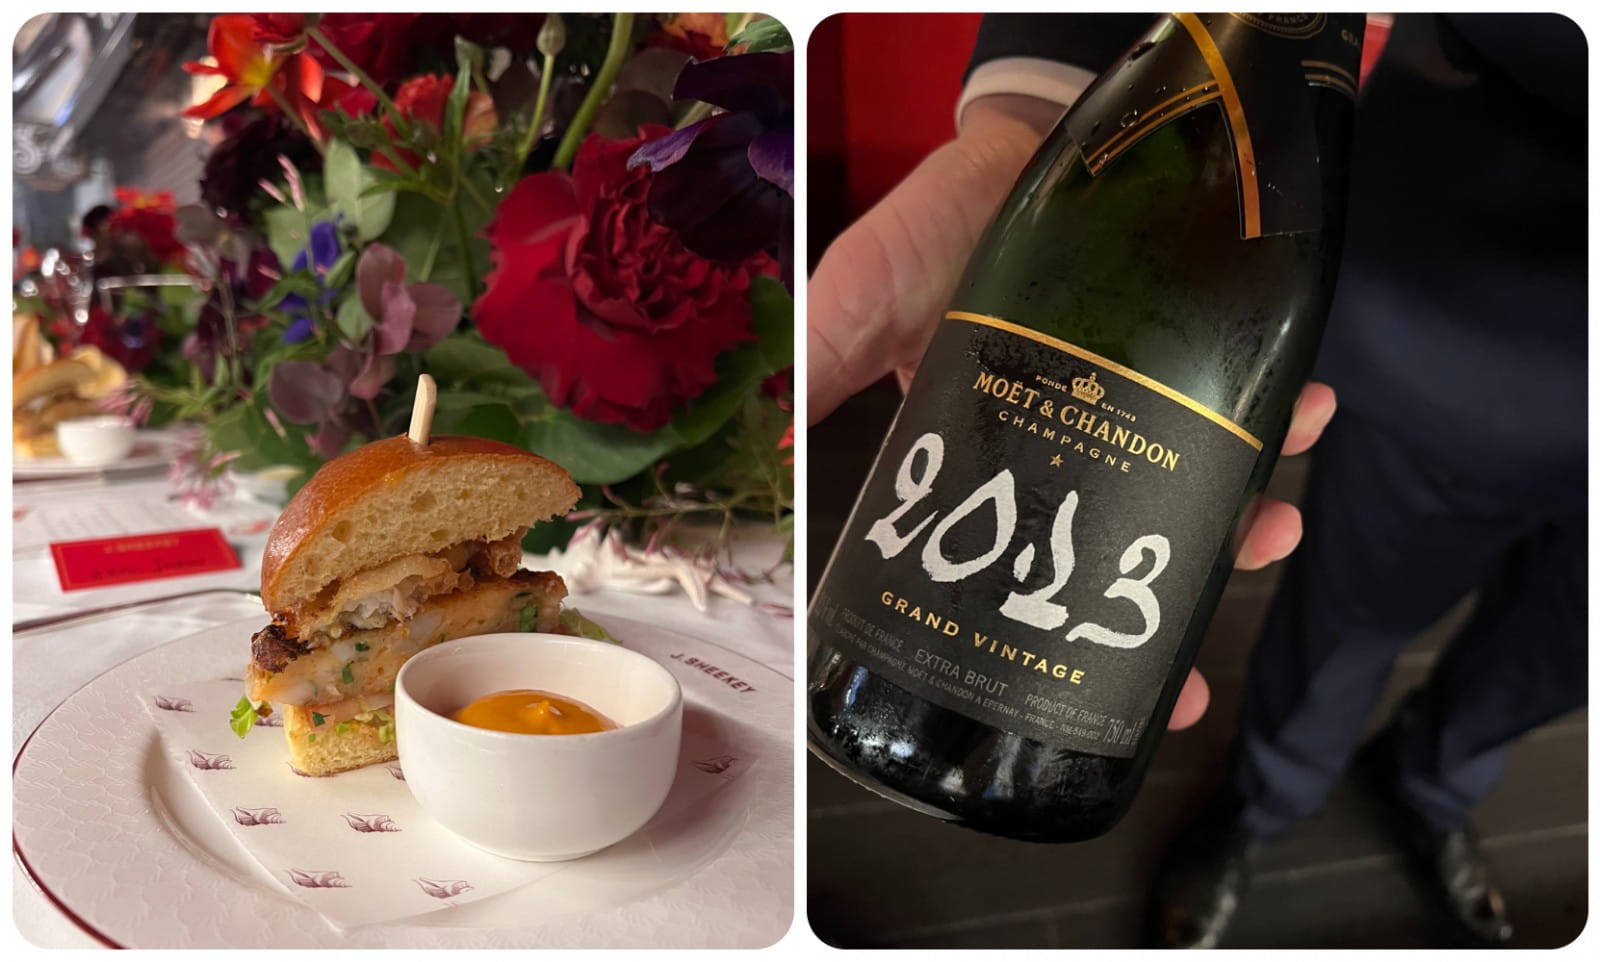 Shrimp and soft shell crab burger with vintage champagne